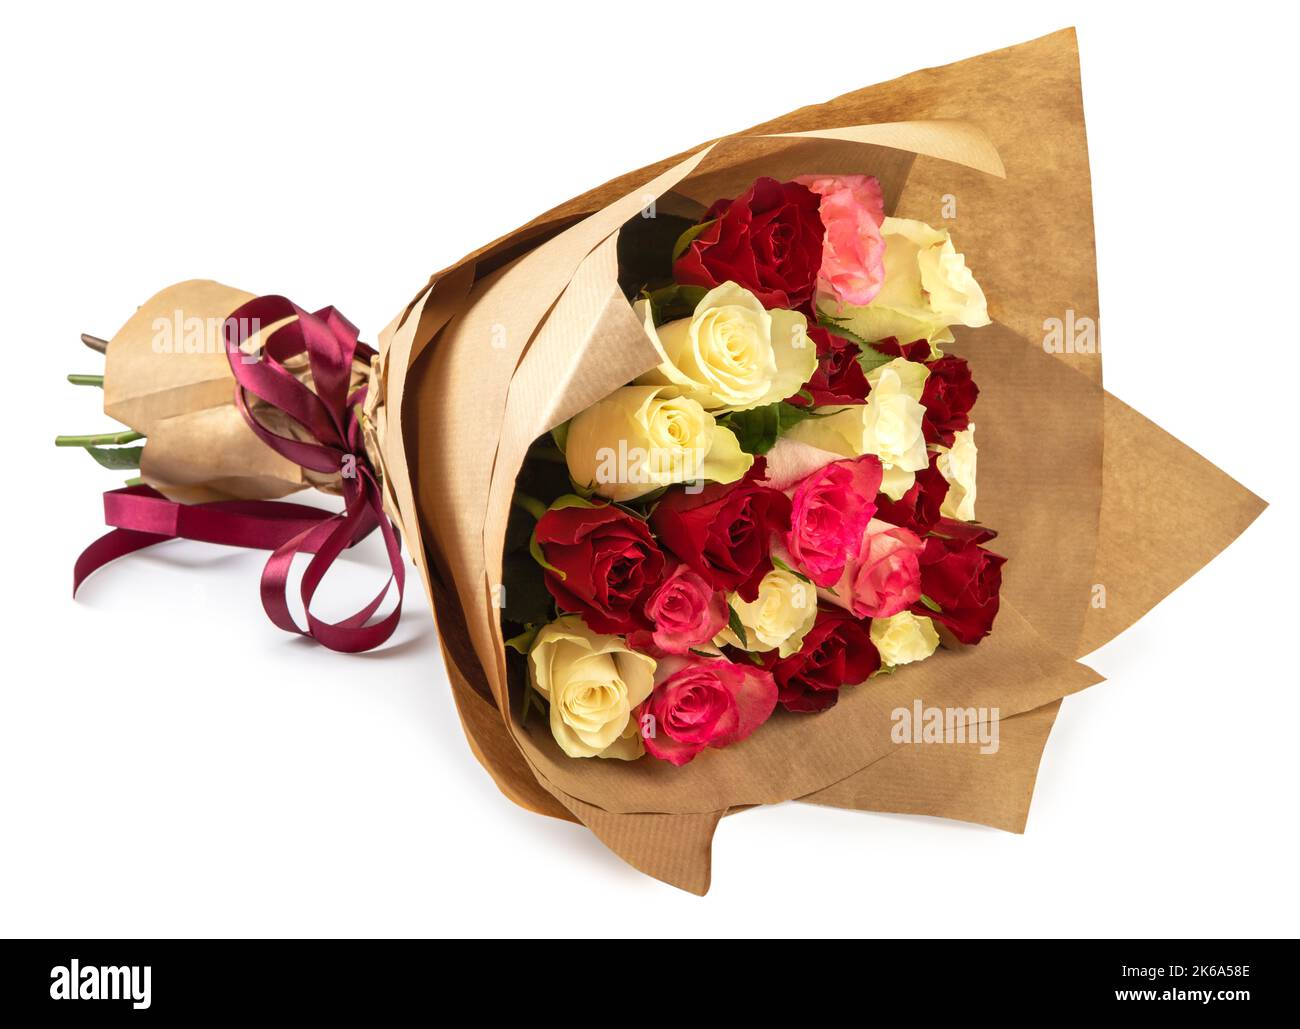 Fresh, bouquet of roses wrapped in kraft paper for gift, isolated on white background. Stock Photo